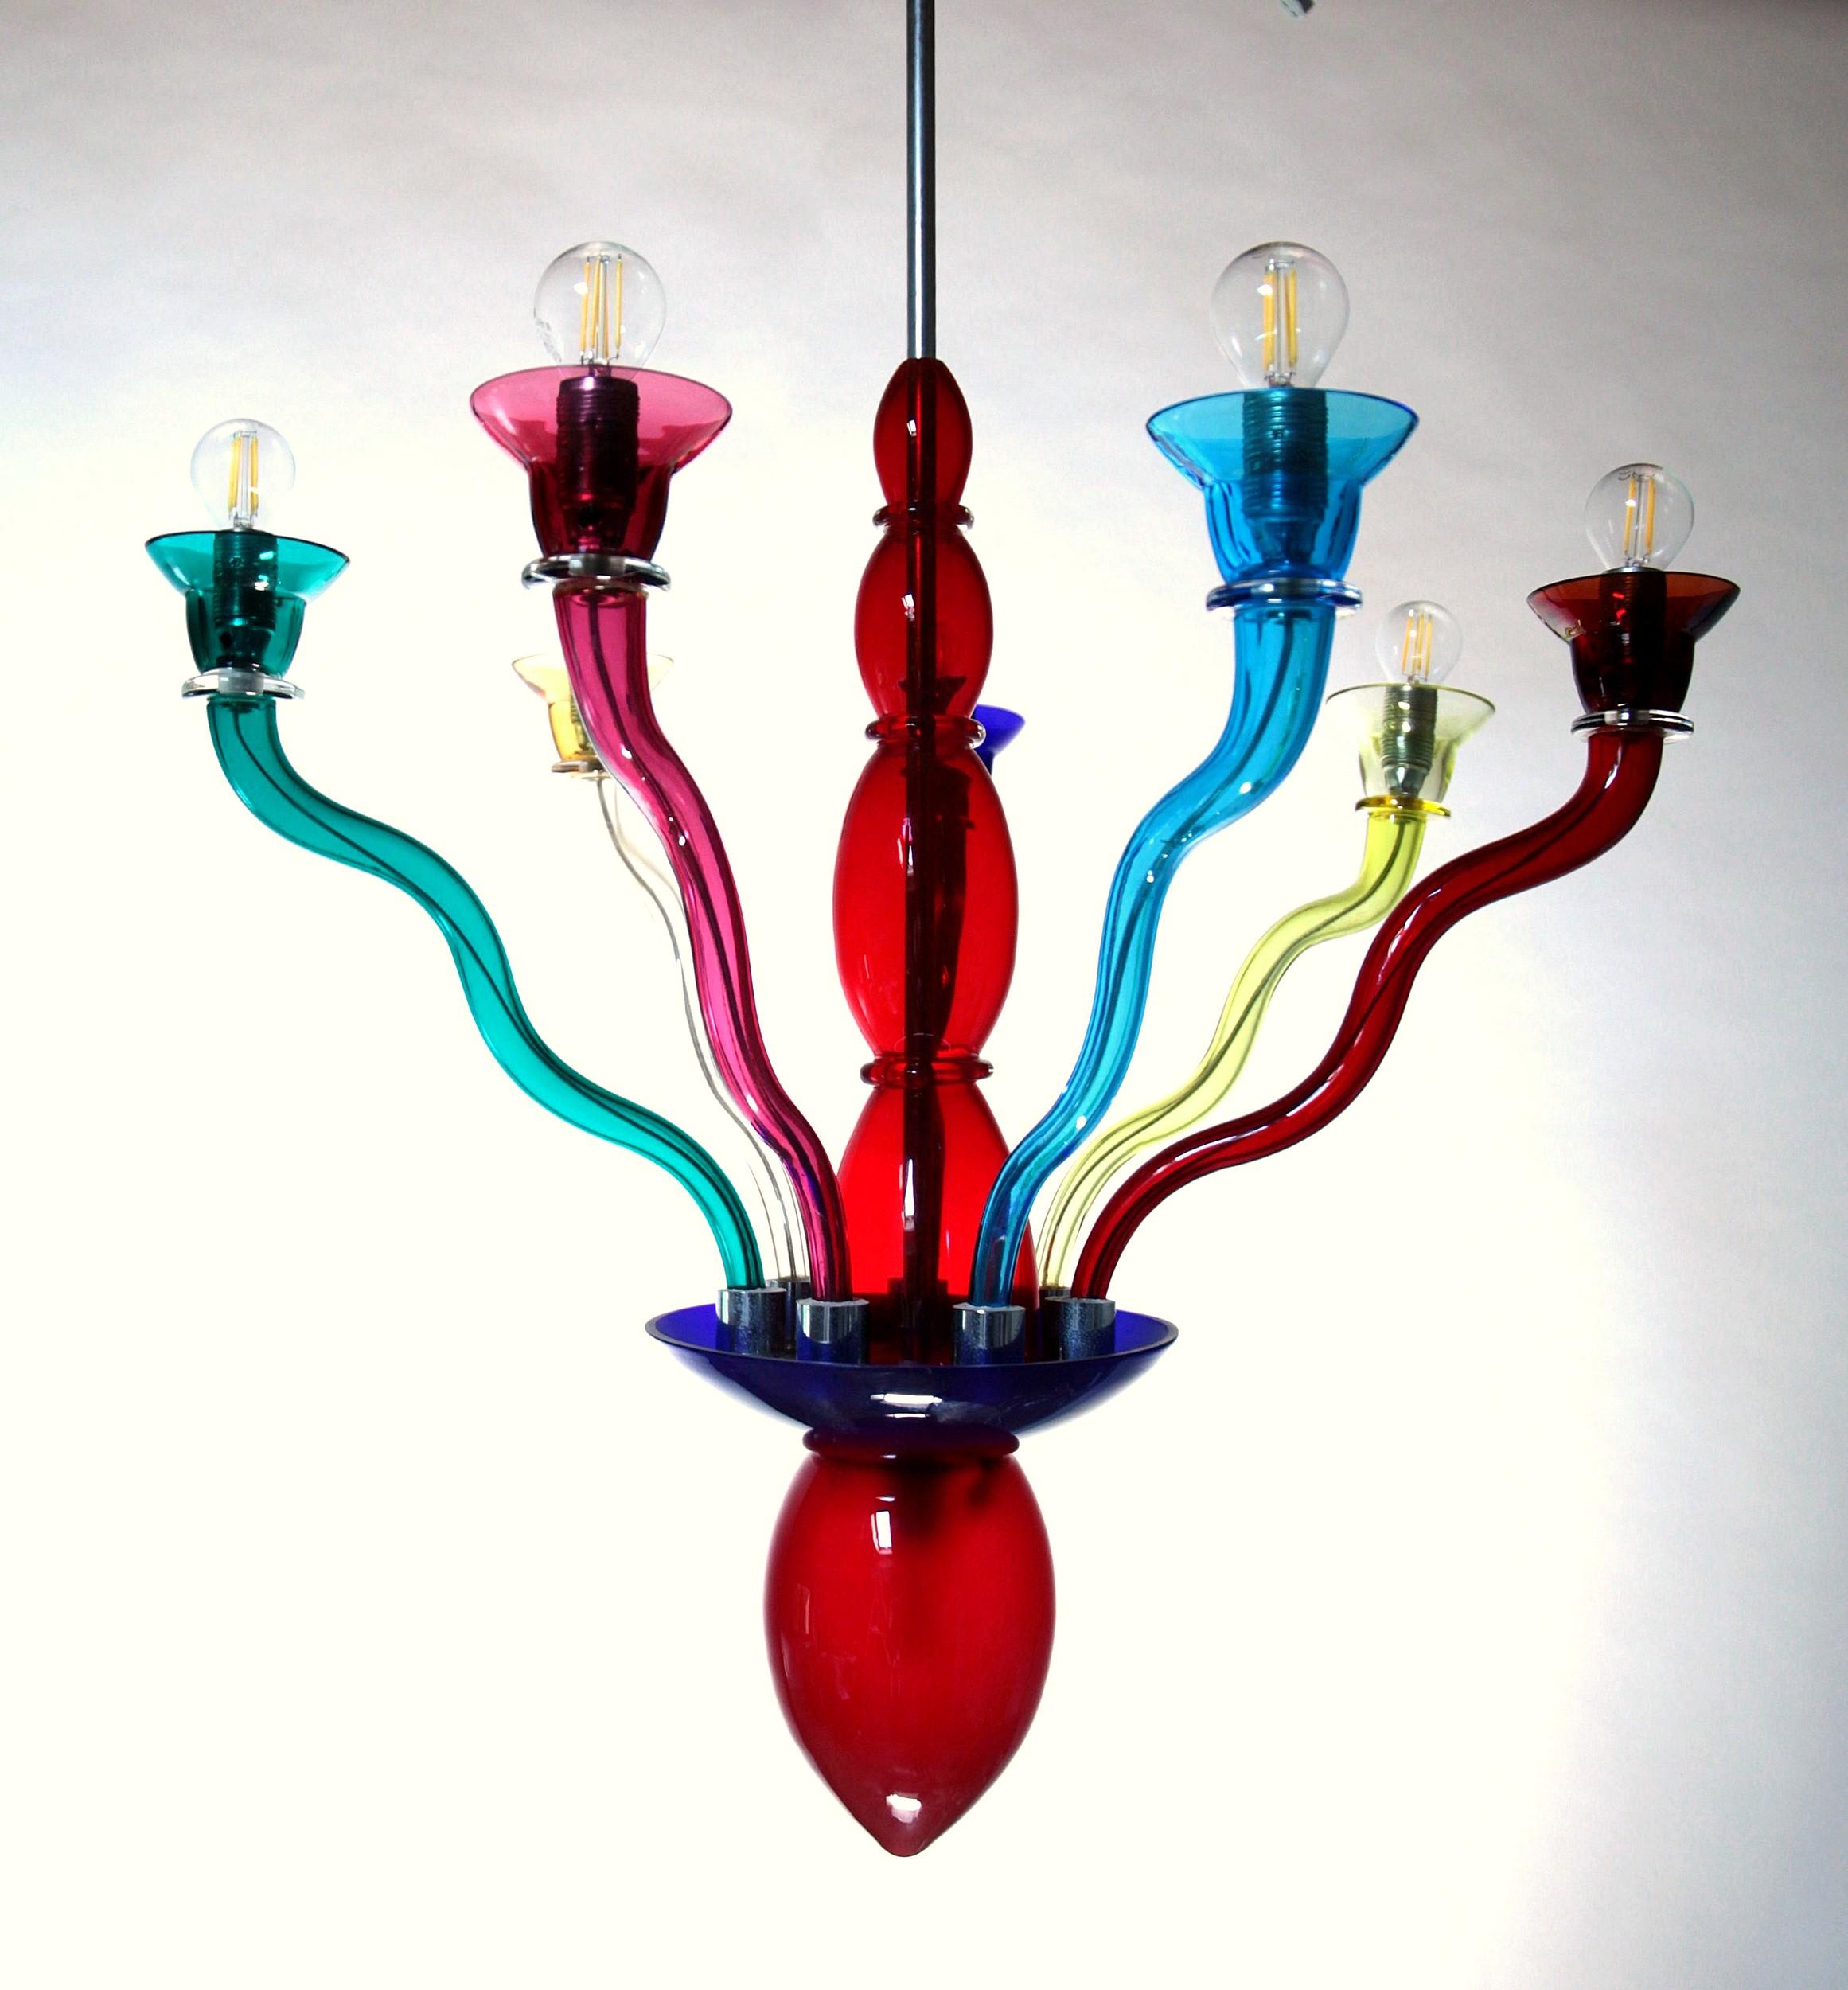 The Gaia chandelier, the multicolored edition, is an emblem of the 80s postmodern style.

This multicolored version is an extremely rare find. It was designed by Gismondi for Veart, the owner of Artemide, who later merged Veart with Artemide.

This